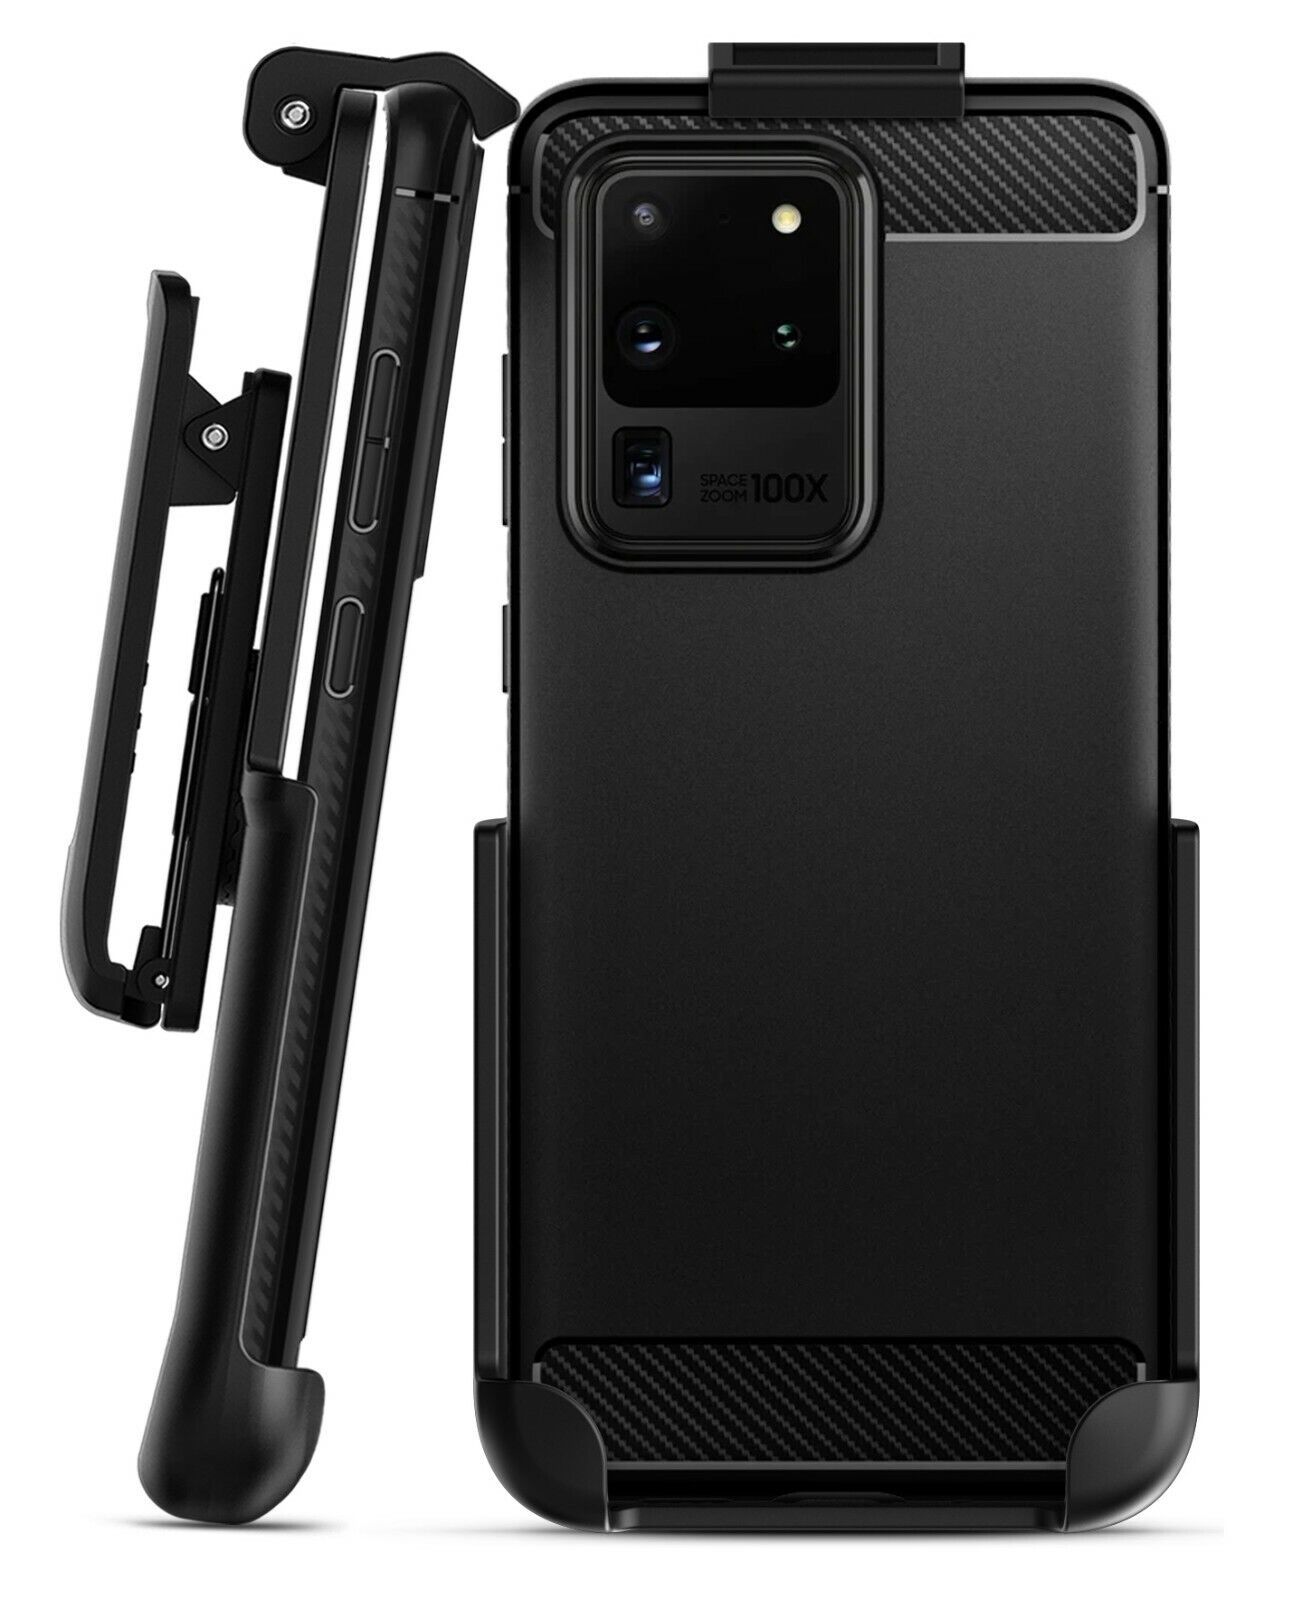 Primary image for Belt Clip For Spigen Rugged Armor Case - Galaxy S20 Ultra (Case Is Not Included)